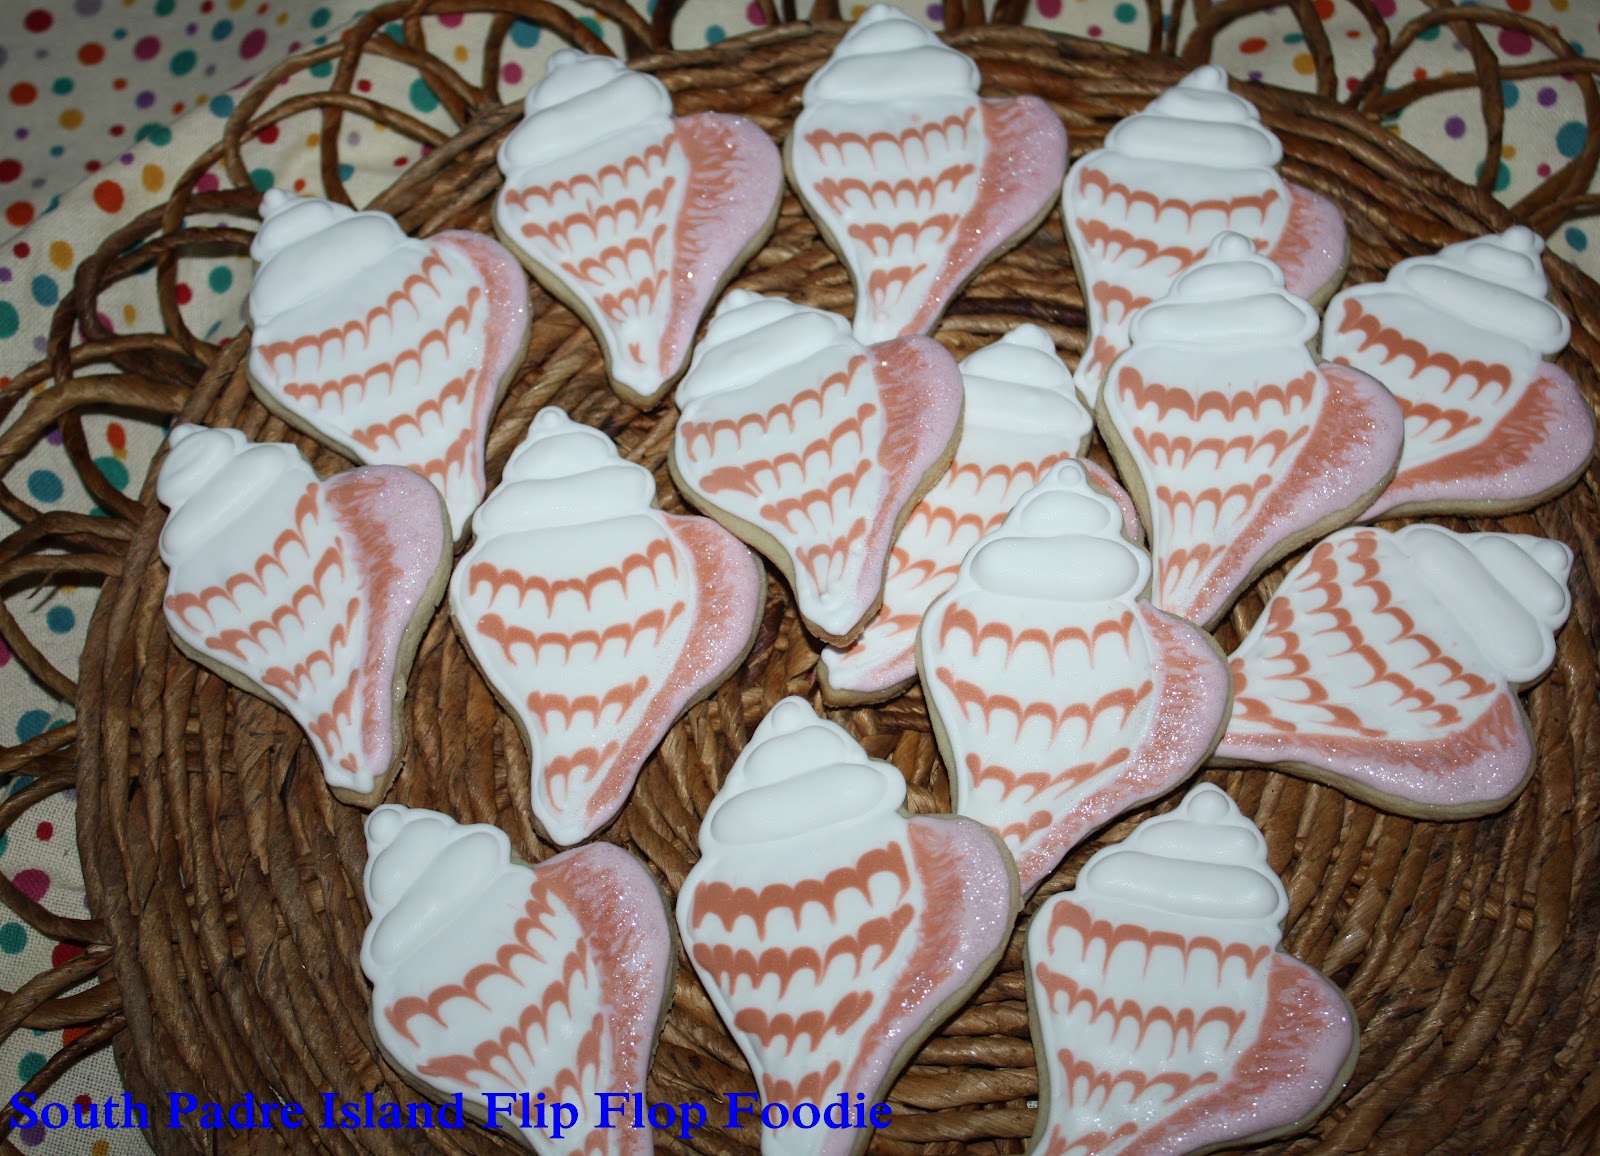 The South Padre Island Flip Flop Foodie: Sea Shell Cookies